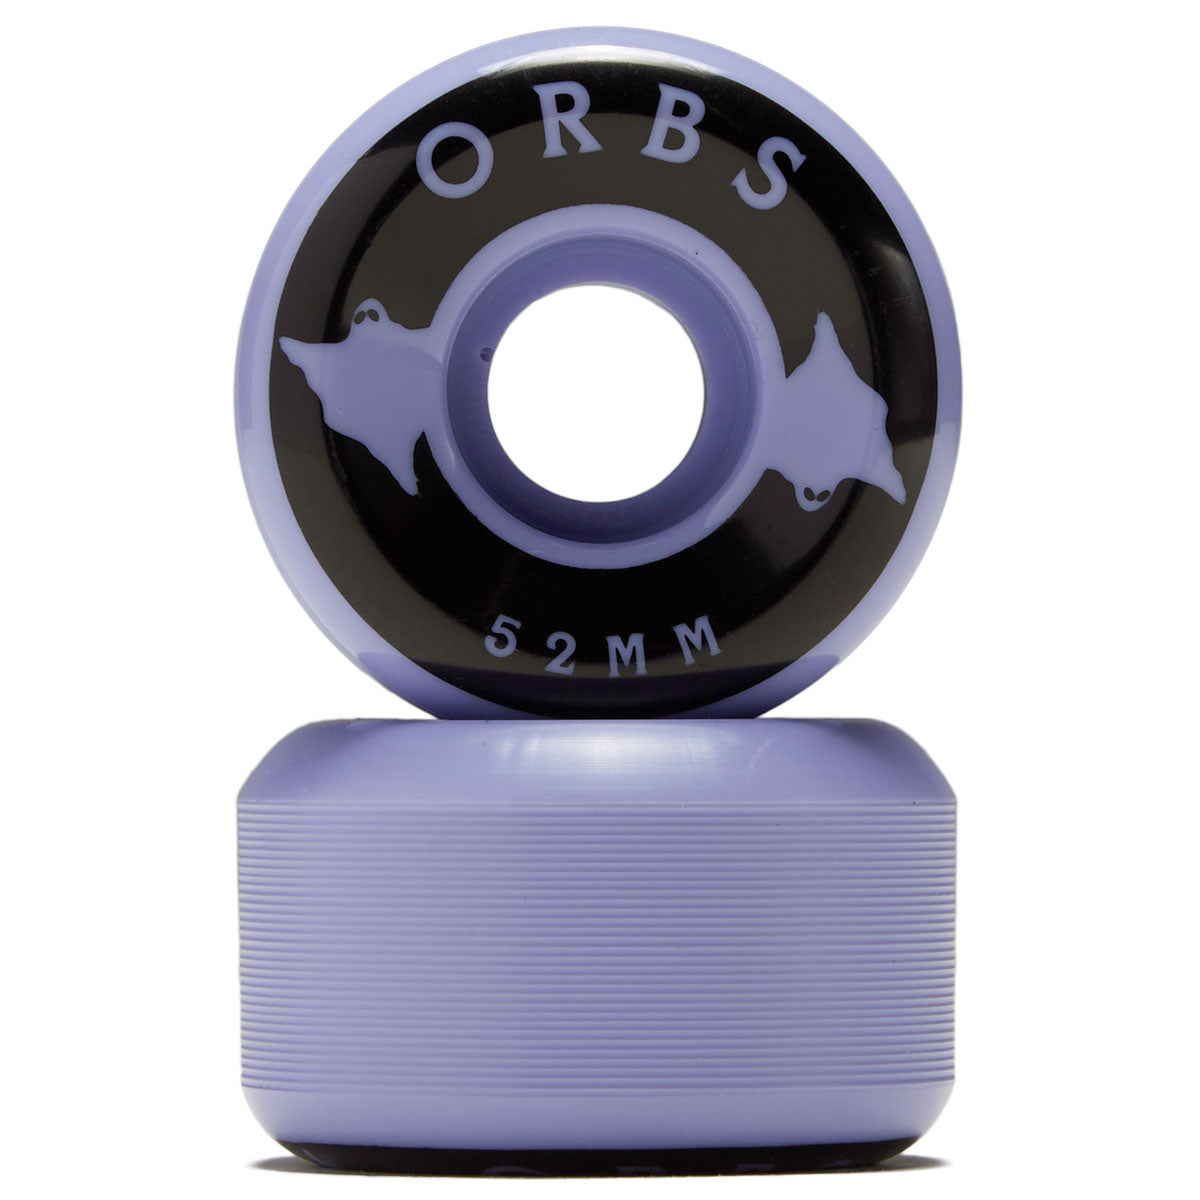 Welcome Orbs Specters Conical 99A Skateboard Wheels - Lavender - 52mm image 2